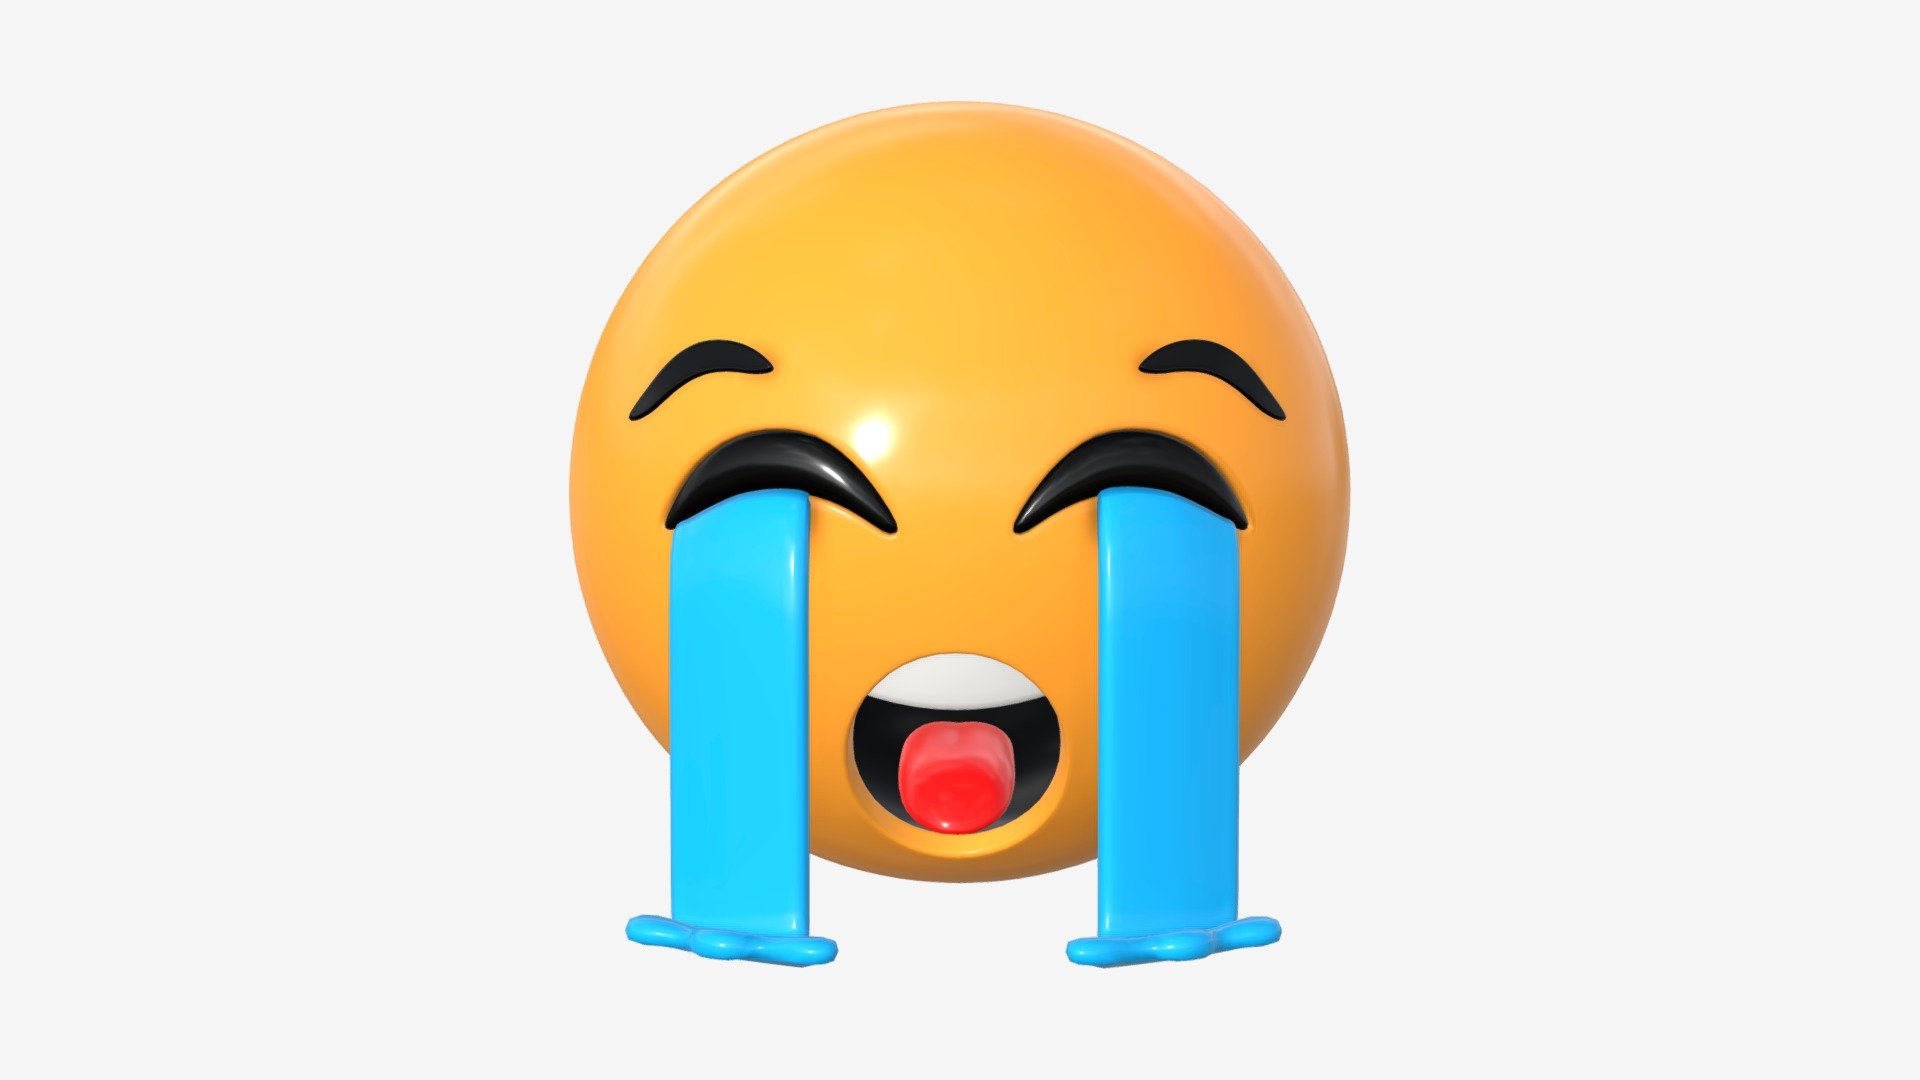 Emoji 042 Loudly crying with tears - Buy Royalty Free 3D model by HQ3DMOD (@AivisAstics) 3d model